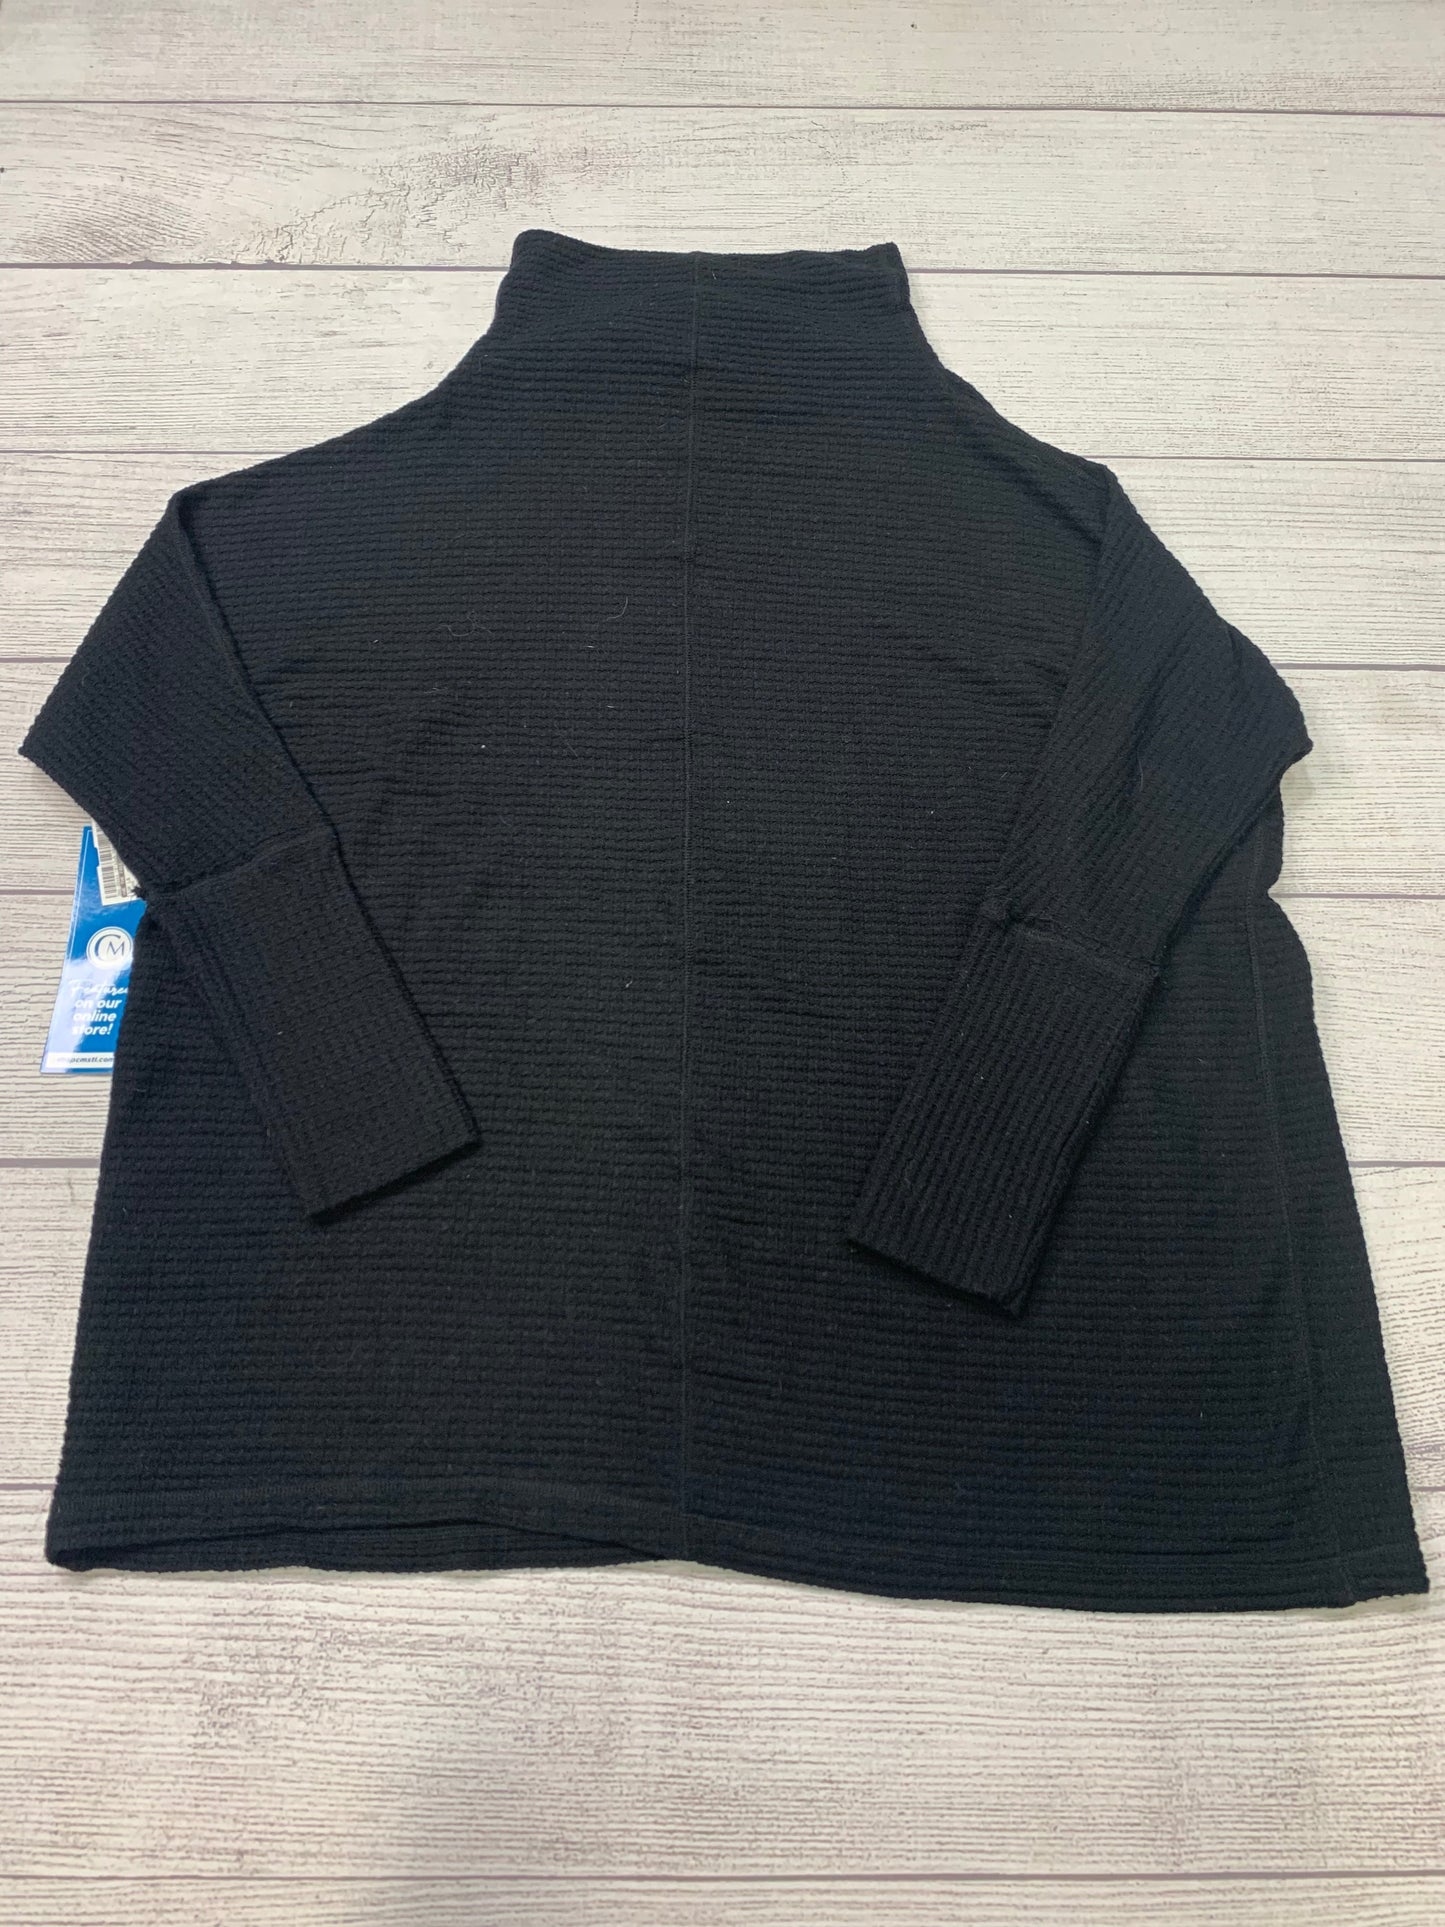 Black Top Long Sleeve We The Free, Size L